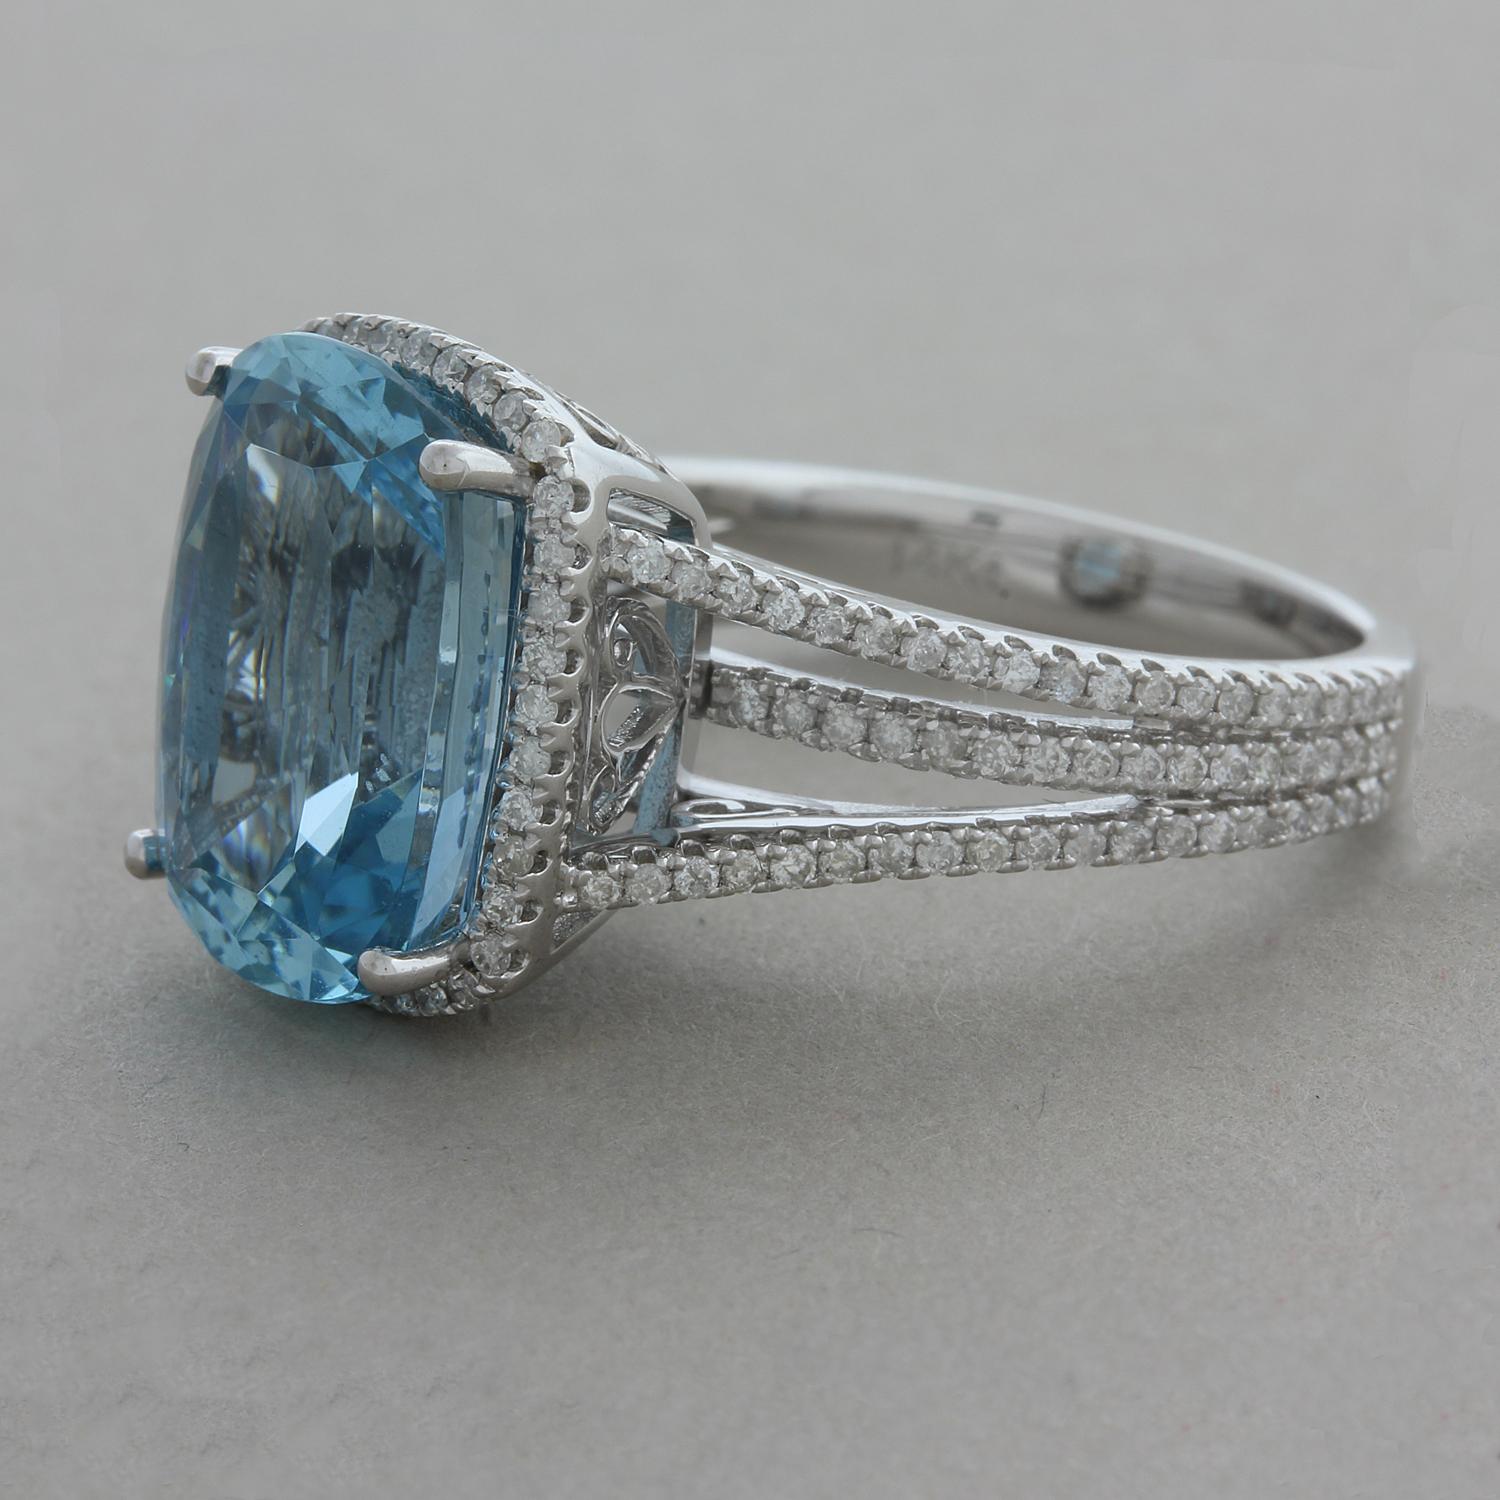 A beautiful gemset ring featuring a 6.17 carat cushion cut aquamarine with a soft sea blue color. The gem is accented by 0.62 carats or round brilliant cut pave set diamonds running along the shoulders of the ring as well as creating a halo around